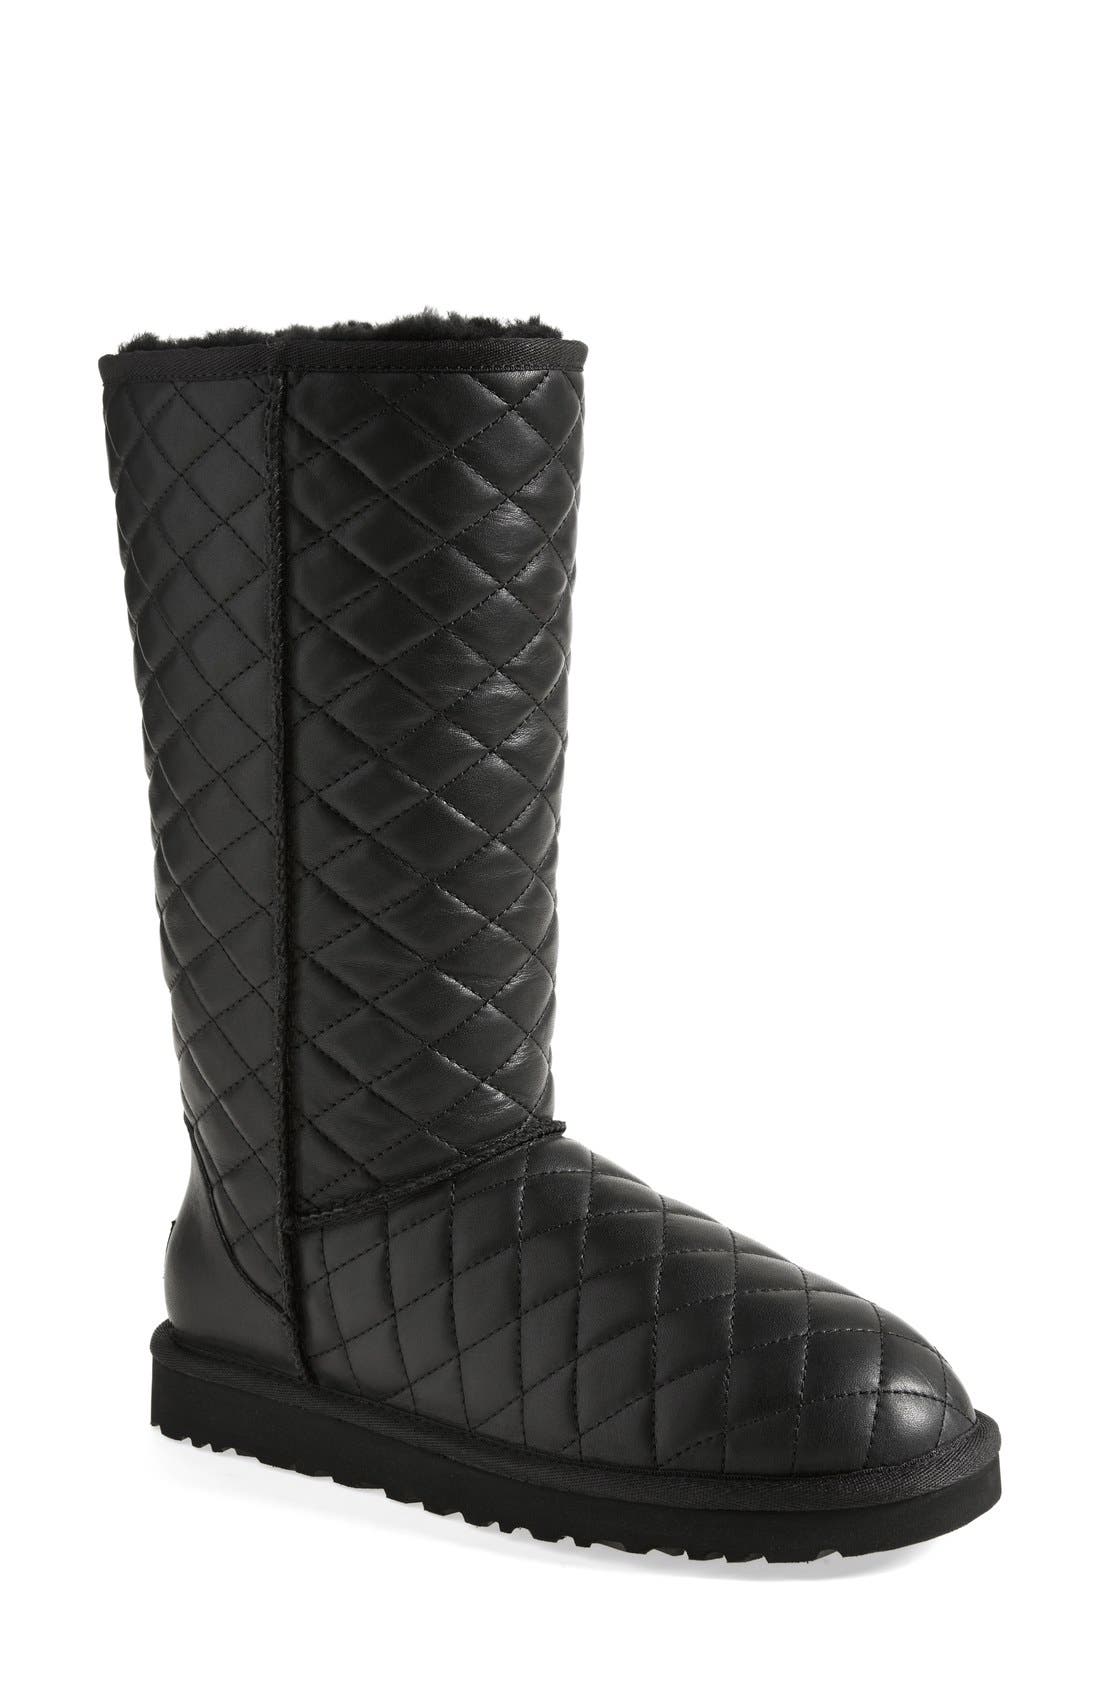 ugg diamond quilted boots